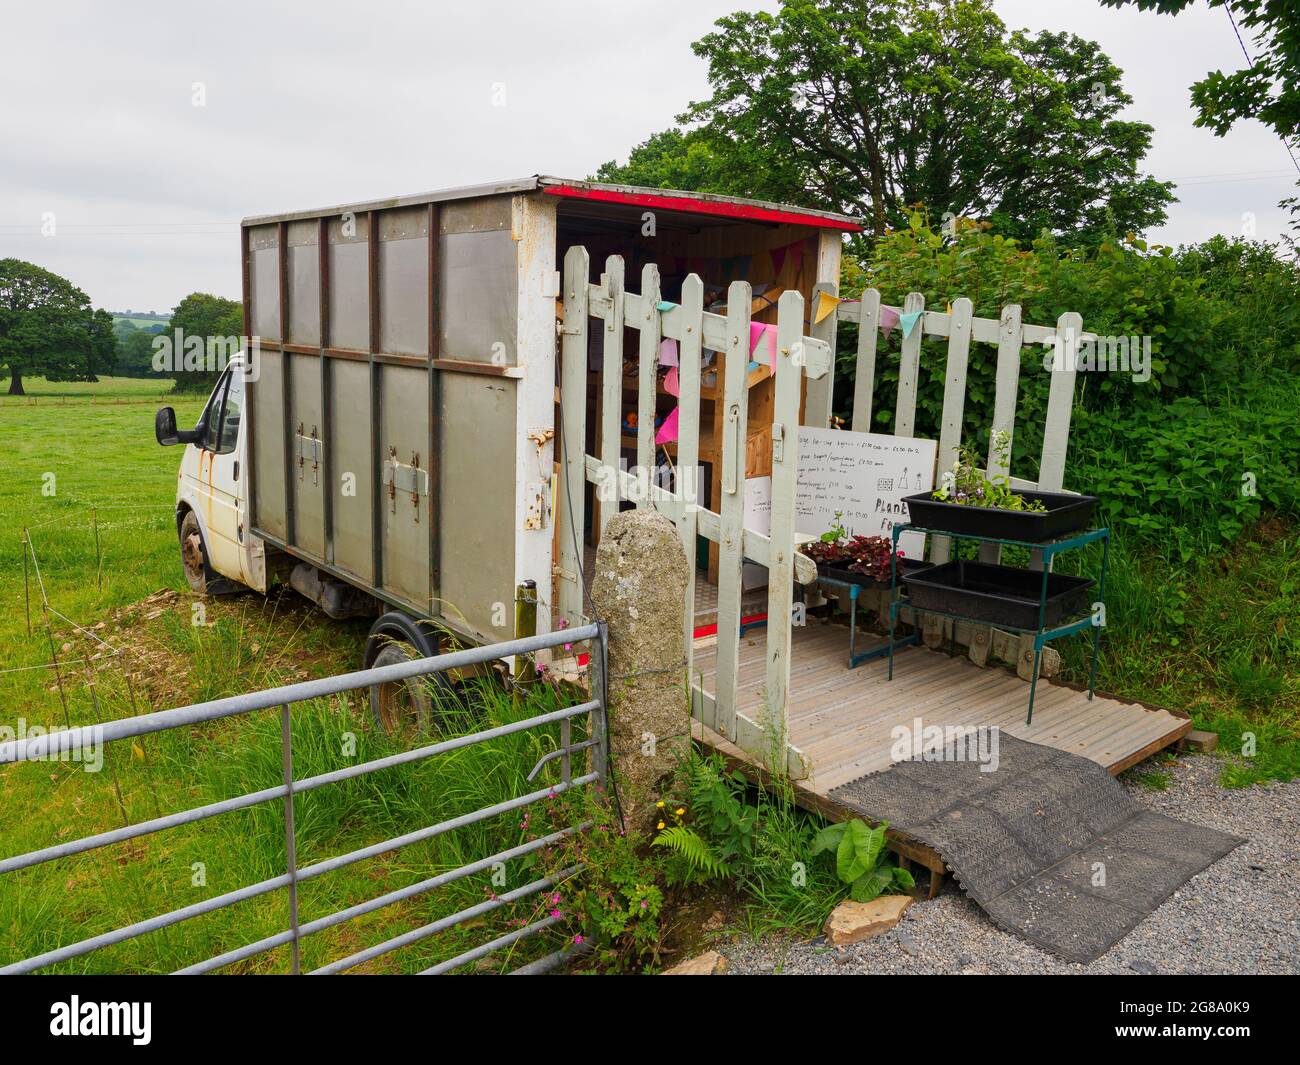 Gem's fresh produce, Fruit, veg, milk and eggs being sold from an old livestock truck at the side of the road, South Trewithey Farm, near North Hill, Stock Photo